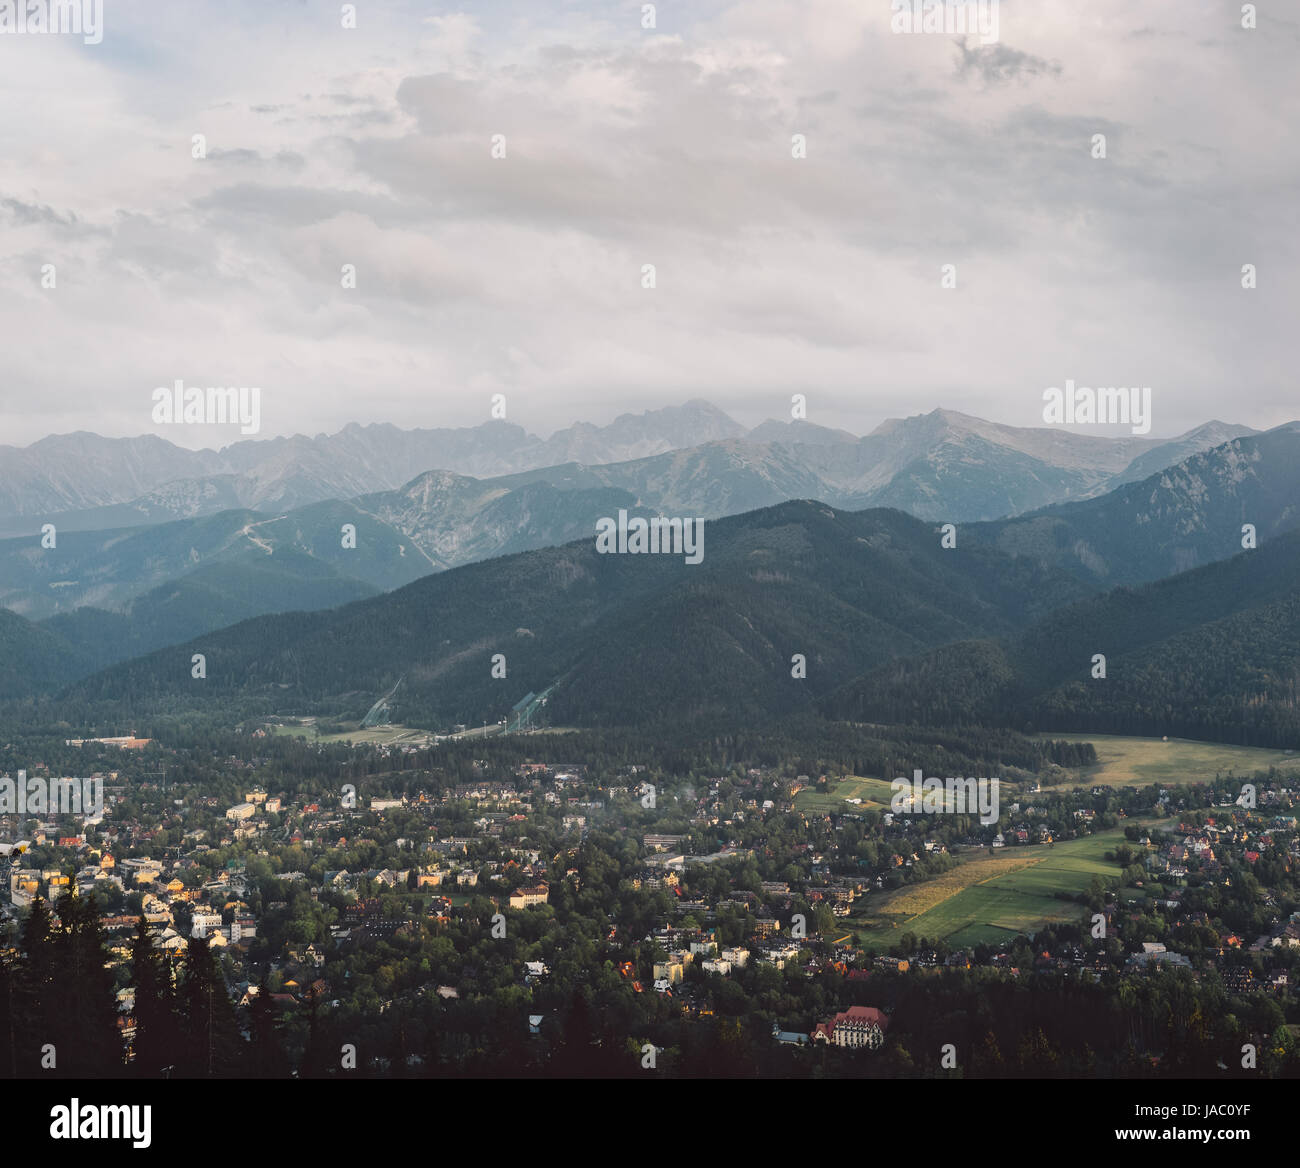 Scenic view of Tatra Mountains in the evening. Instagram filter Stock Photo